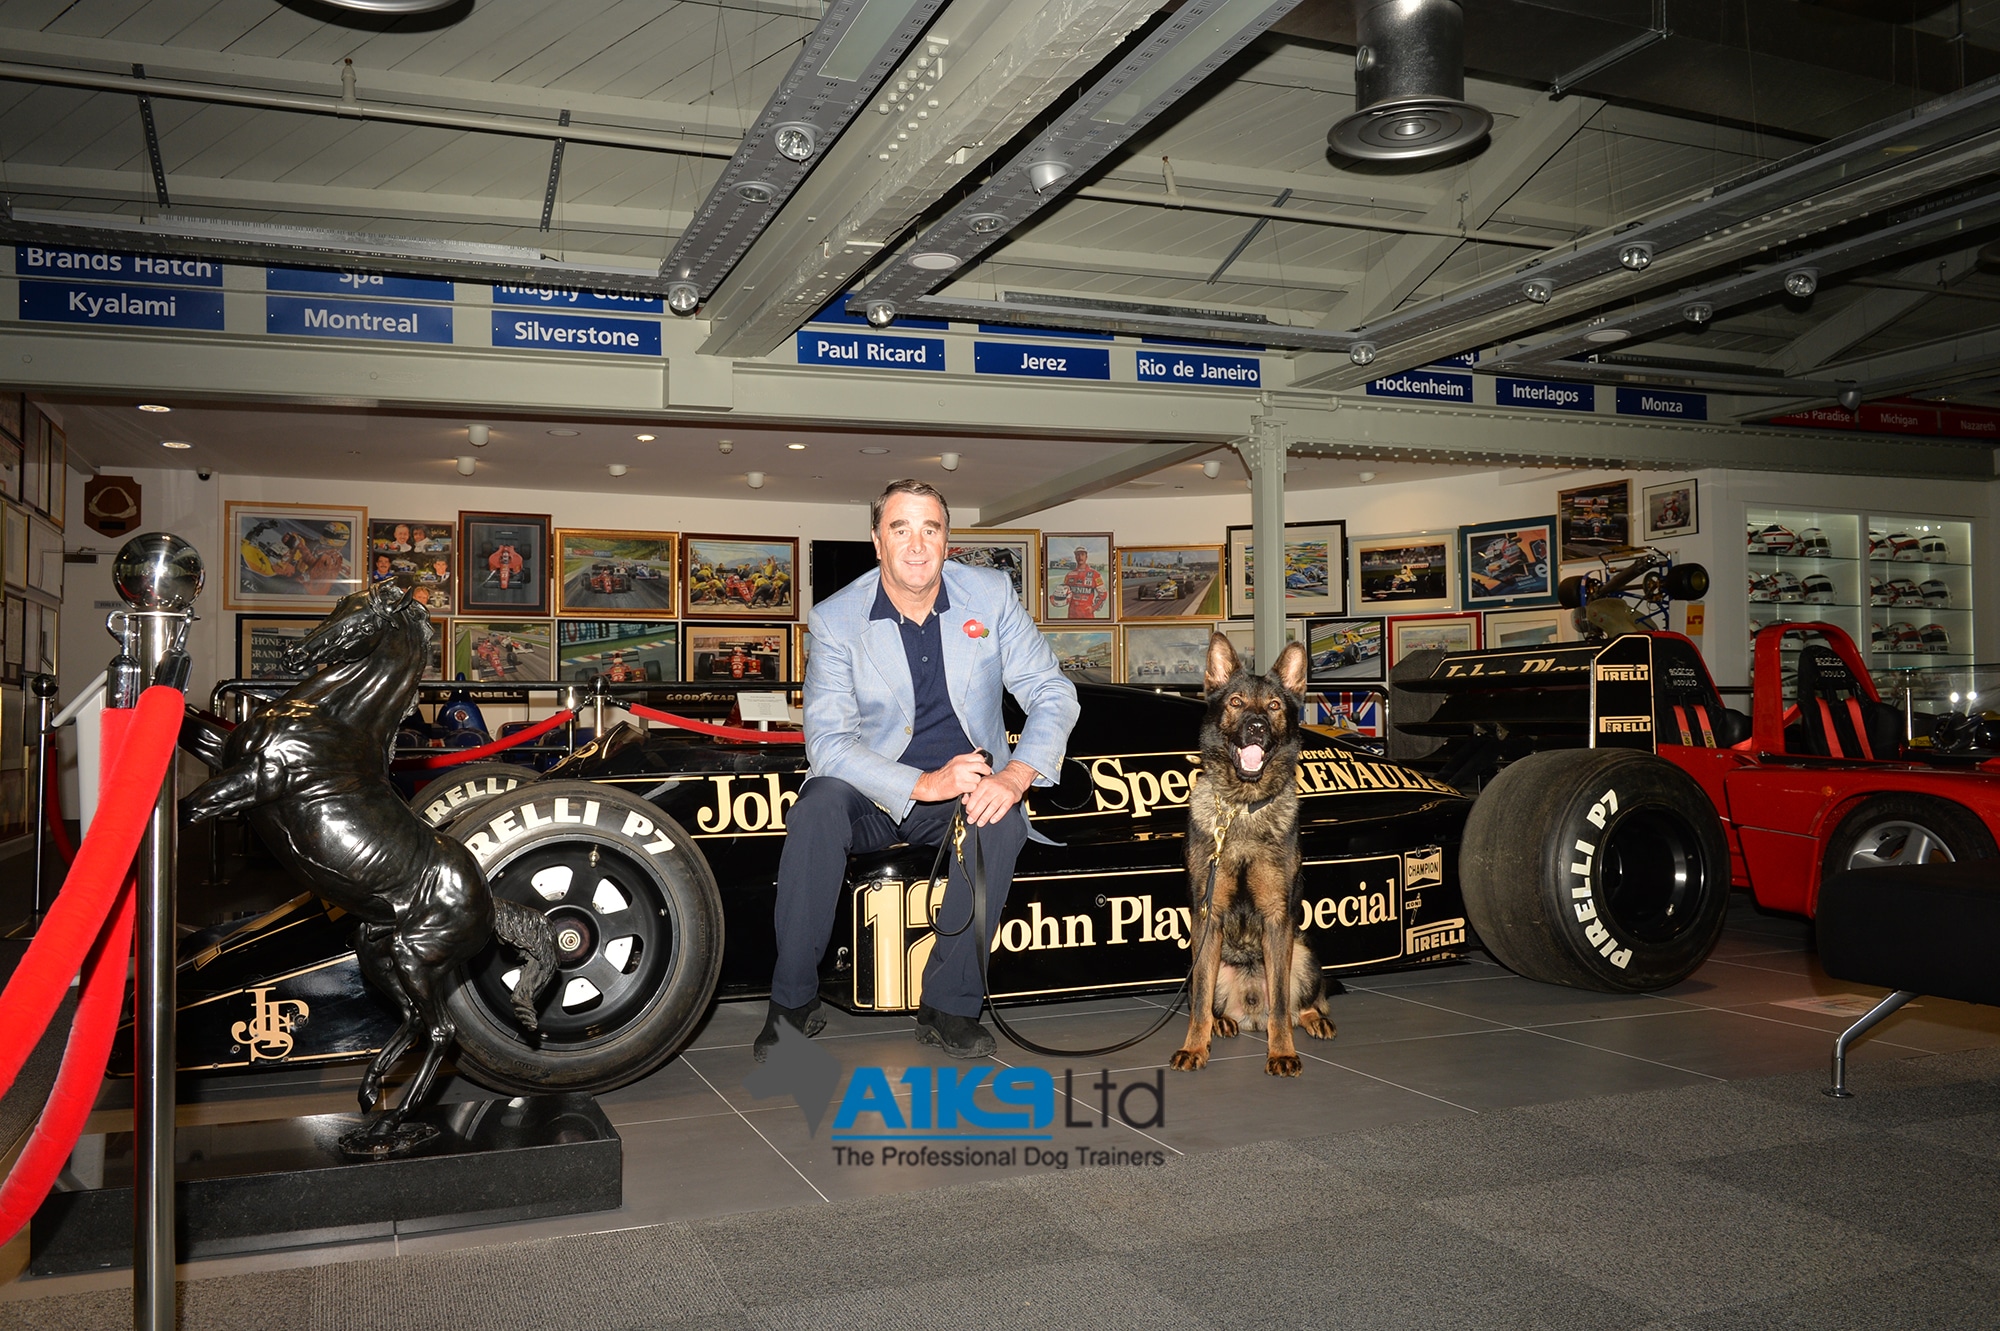 Nigel Mansell a1k9 family protection dogs